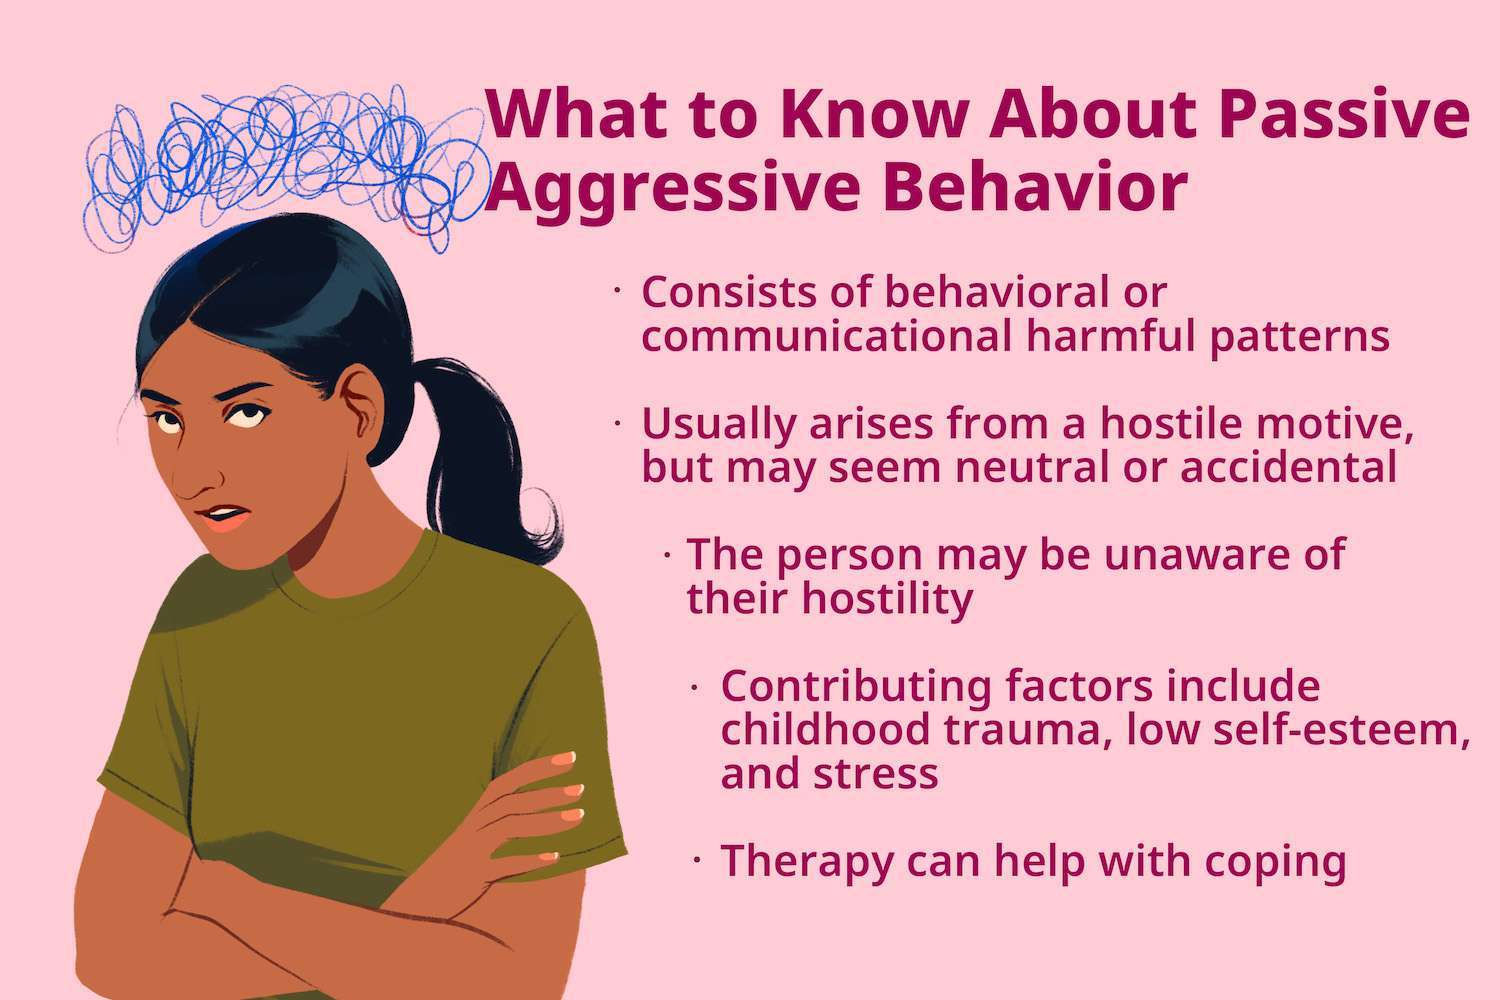 What to know about passive aggressive behavior